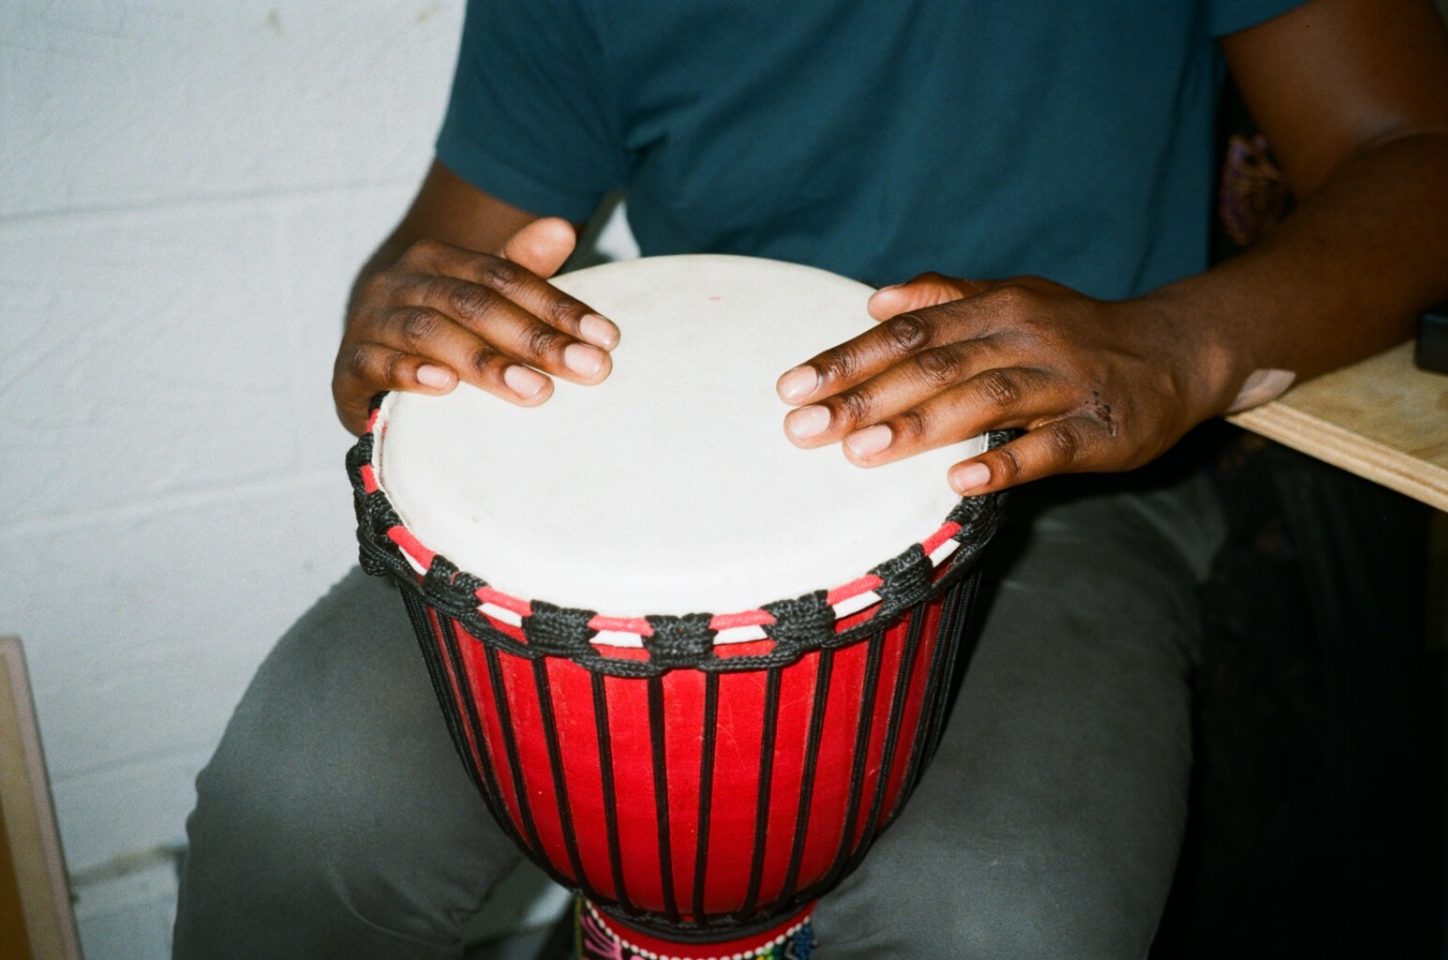 A person holds a drum between their legs and are playing it with their hands.